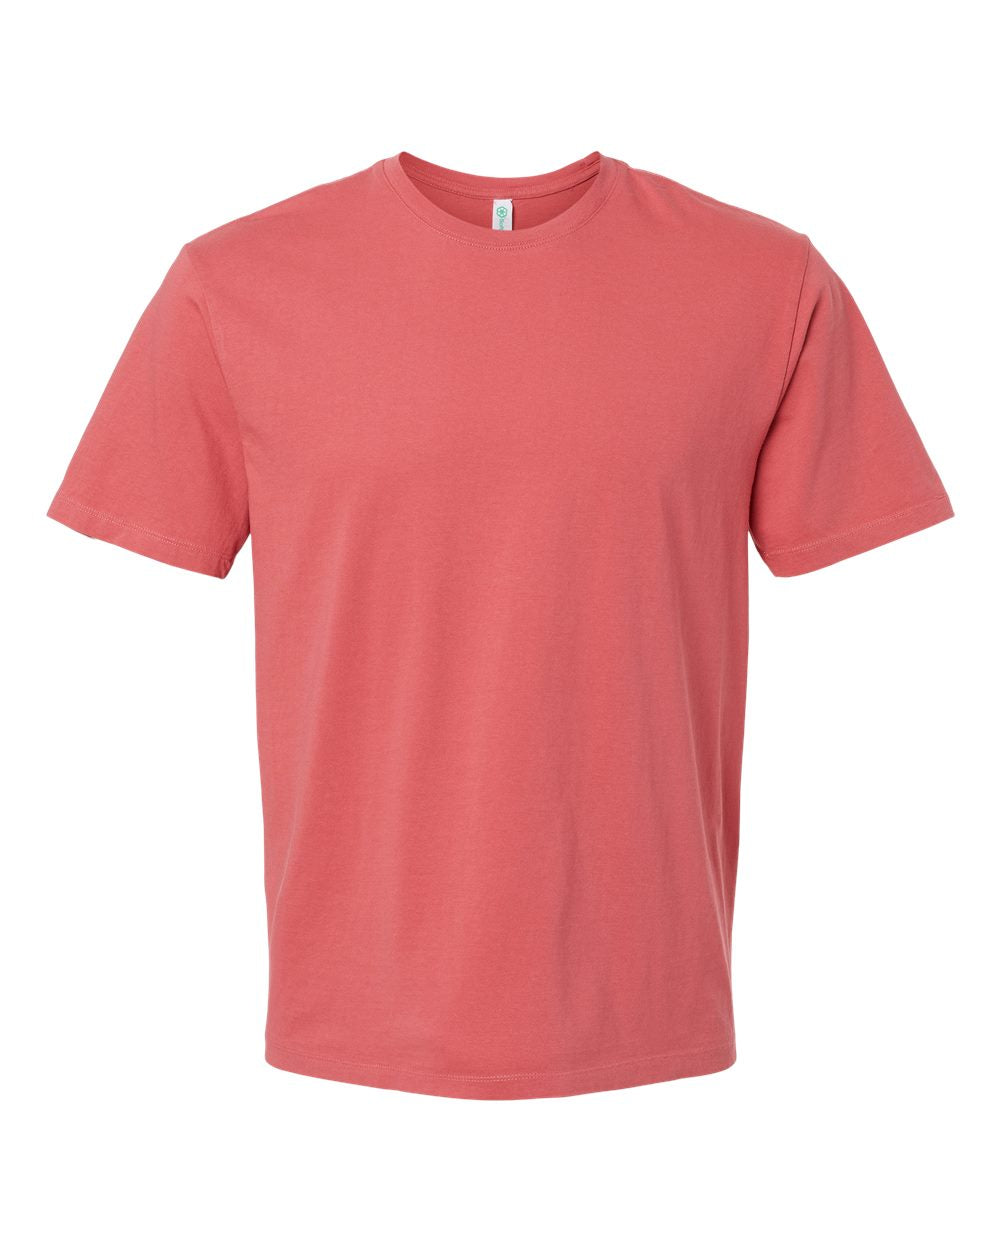 Softshirts® Unisex Organic Cotton T-shirt in red